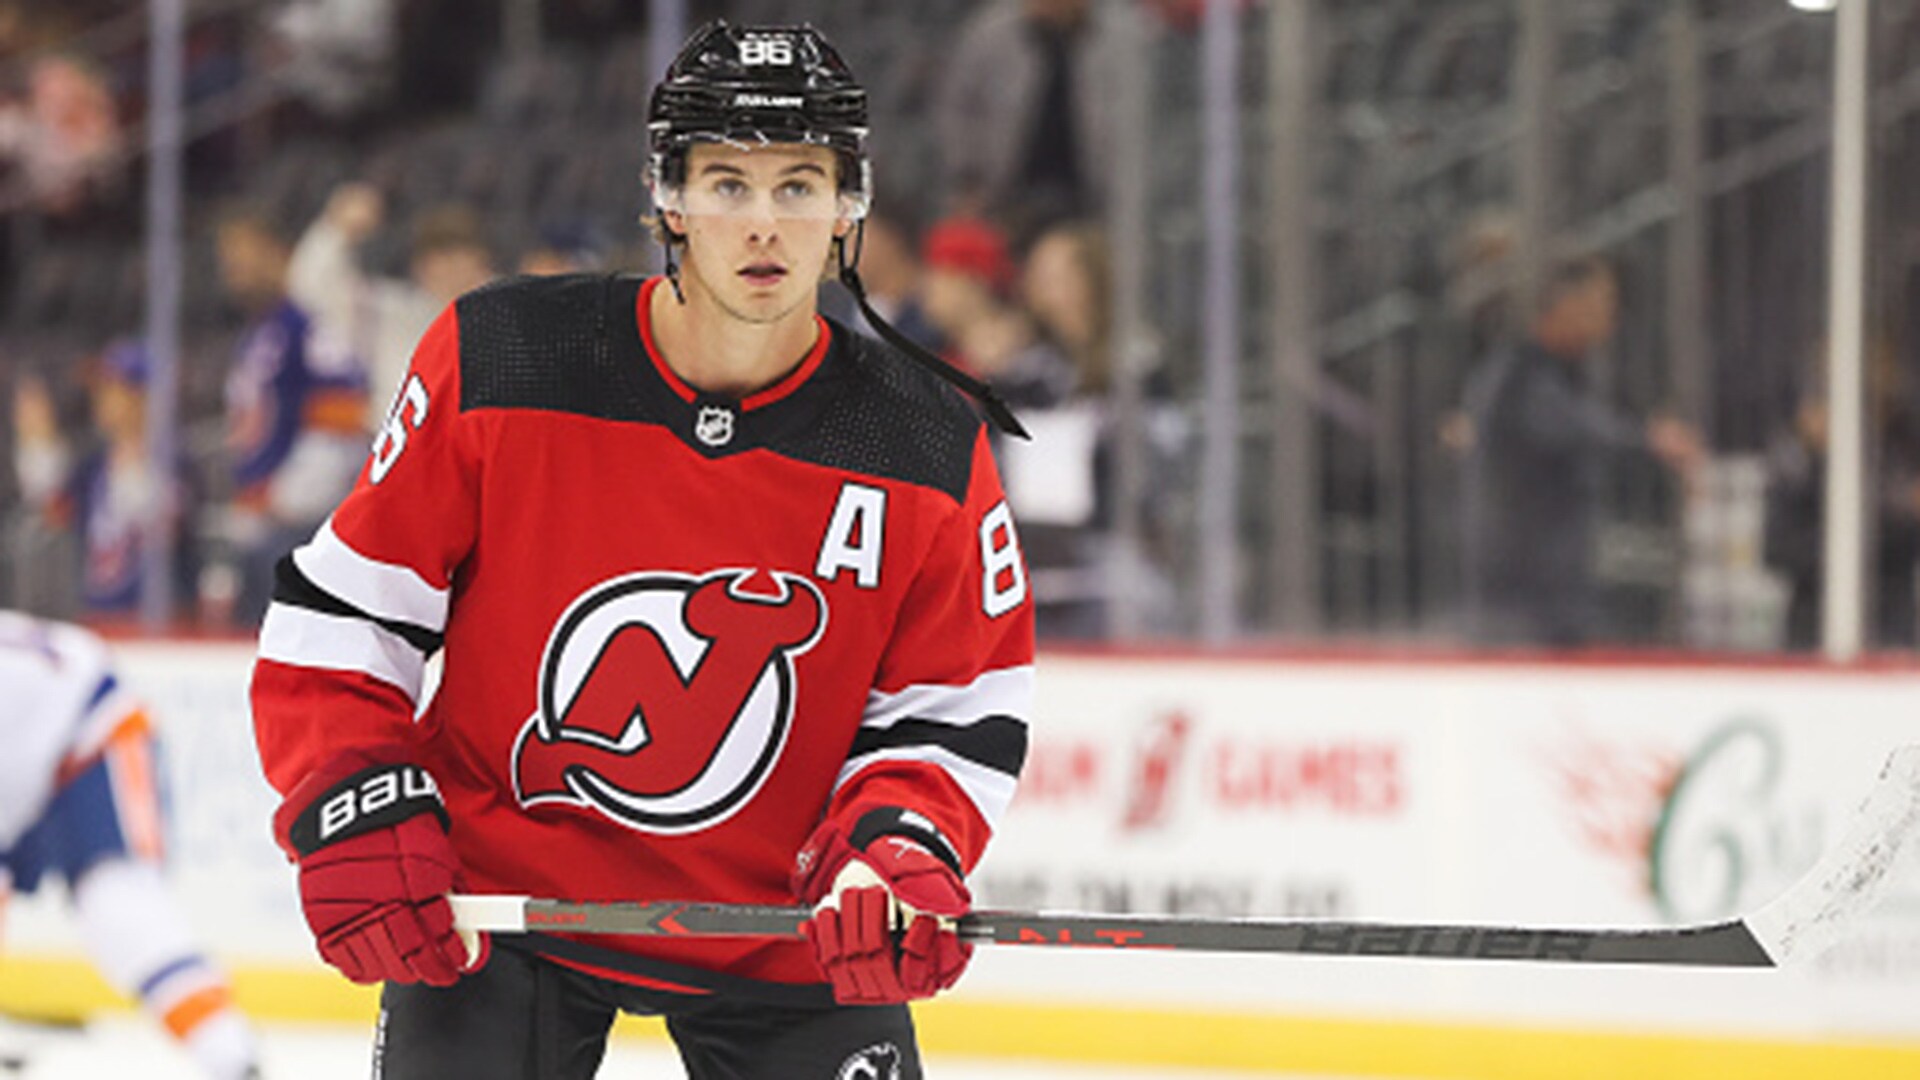 Jack Hughes has first playoff breakout when Devils need it most